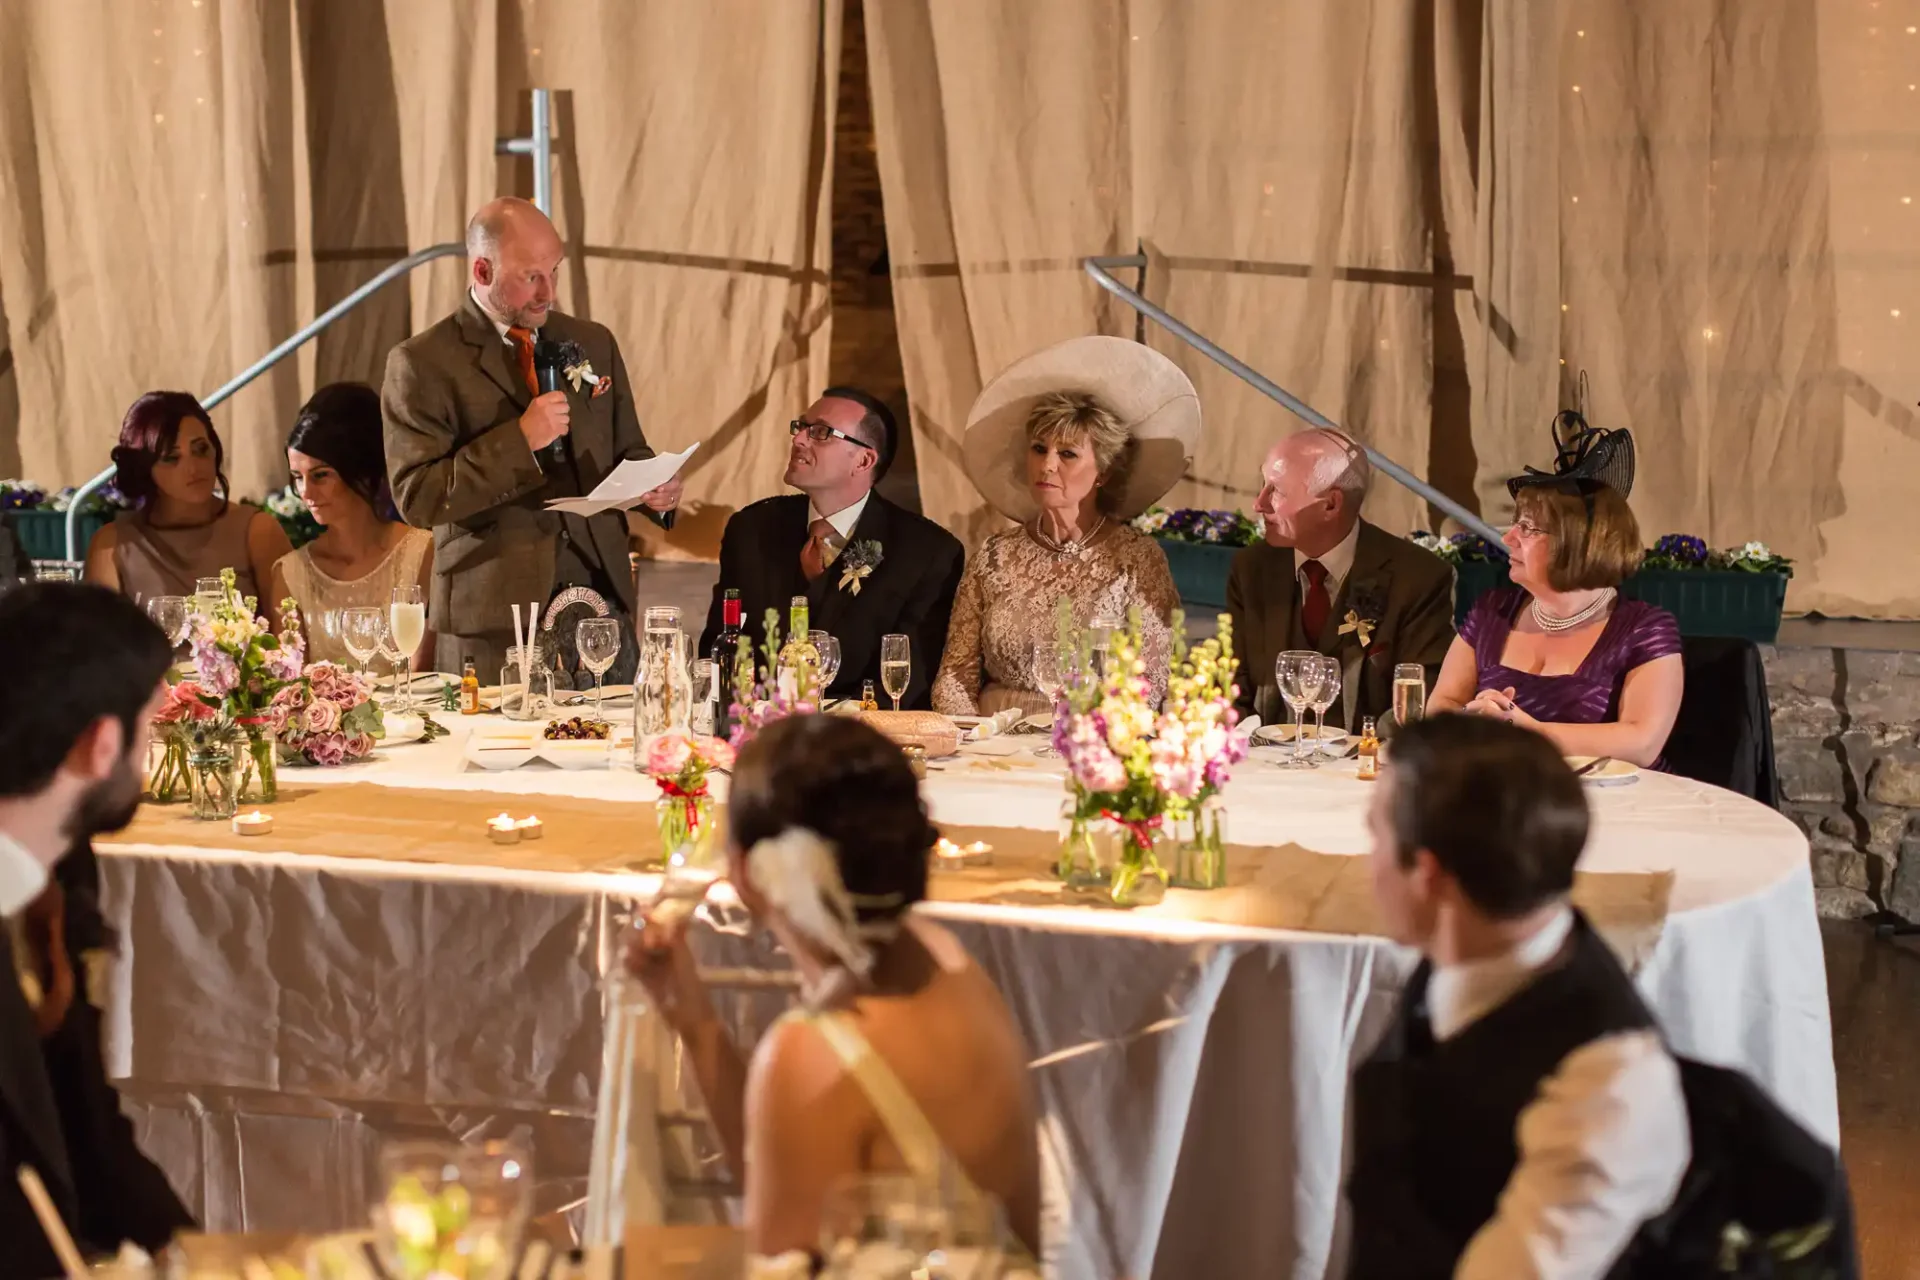 A man gives a speech at a wedding reception, holding a microphone, with guests seated around decorated tables listening attentively.